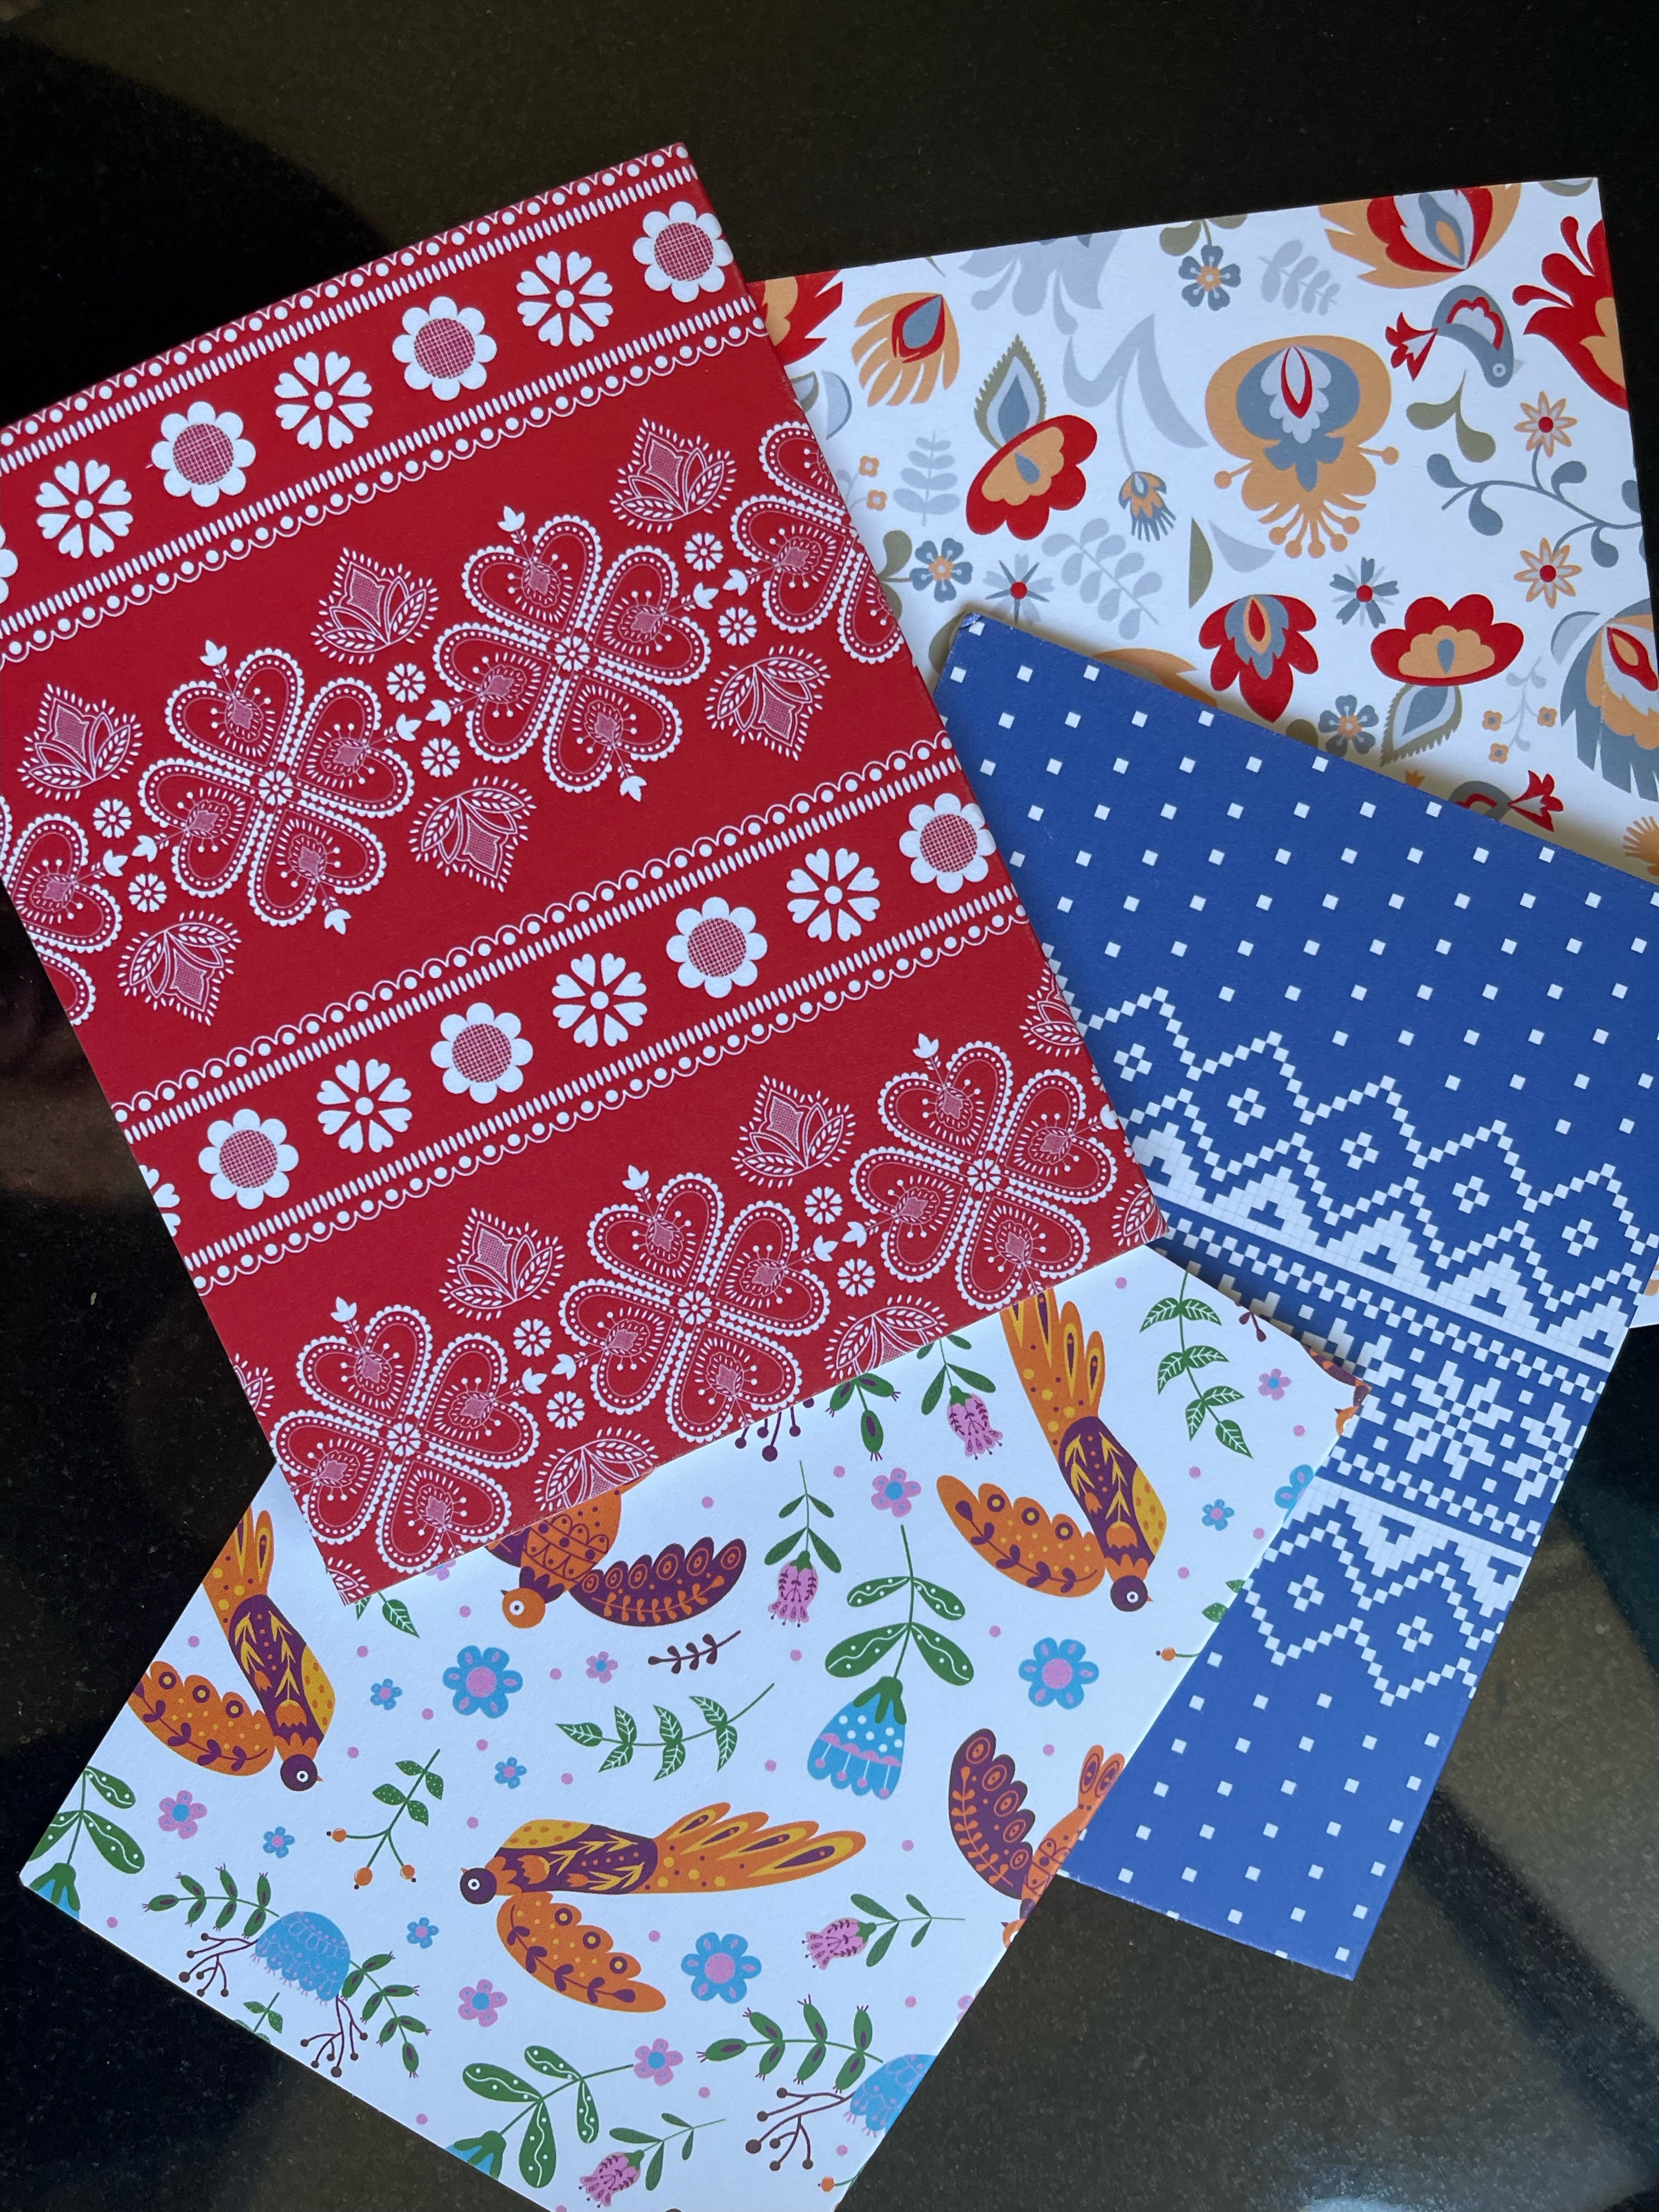 A collection of four notecards with Nordic designs from The Uff Da Sisters, featuring patterns in red with white floral motifs, grey with multicolored flowers, white with colorful birds and floral designs, and blue with white geometric patterns.